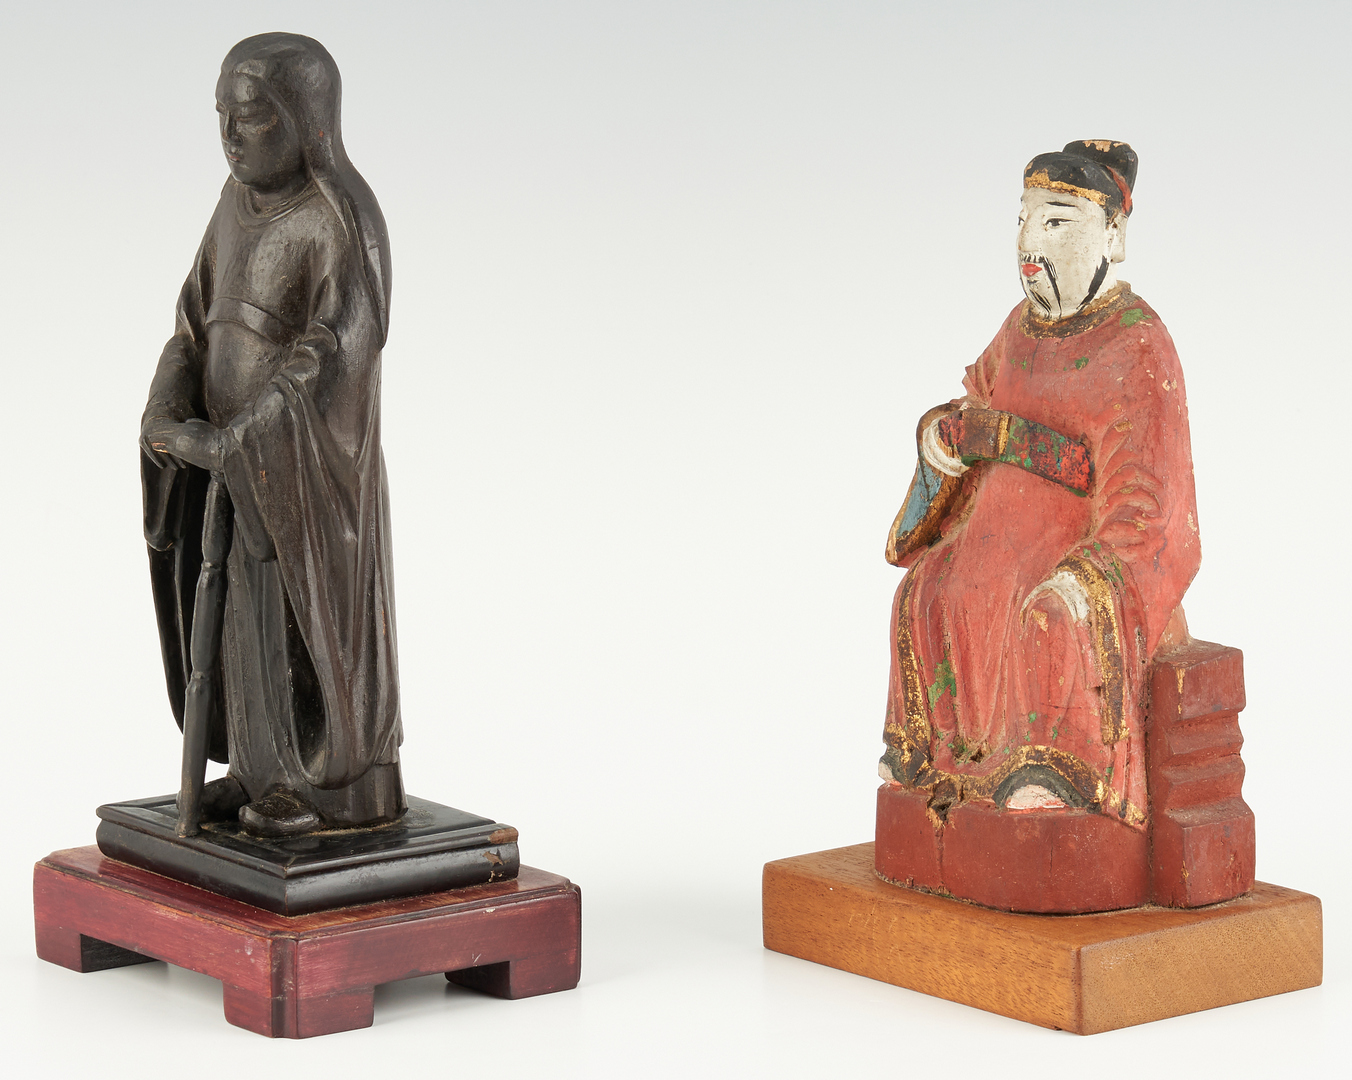 Lot 330: 6 Asian Carved Wood Figures